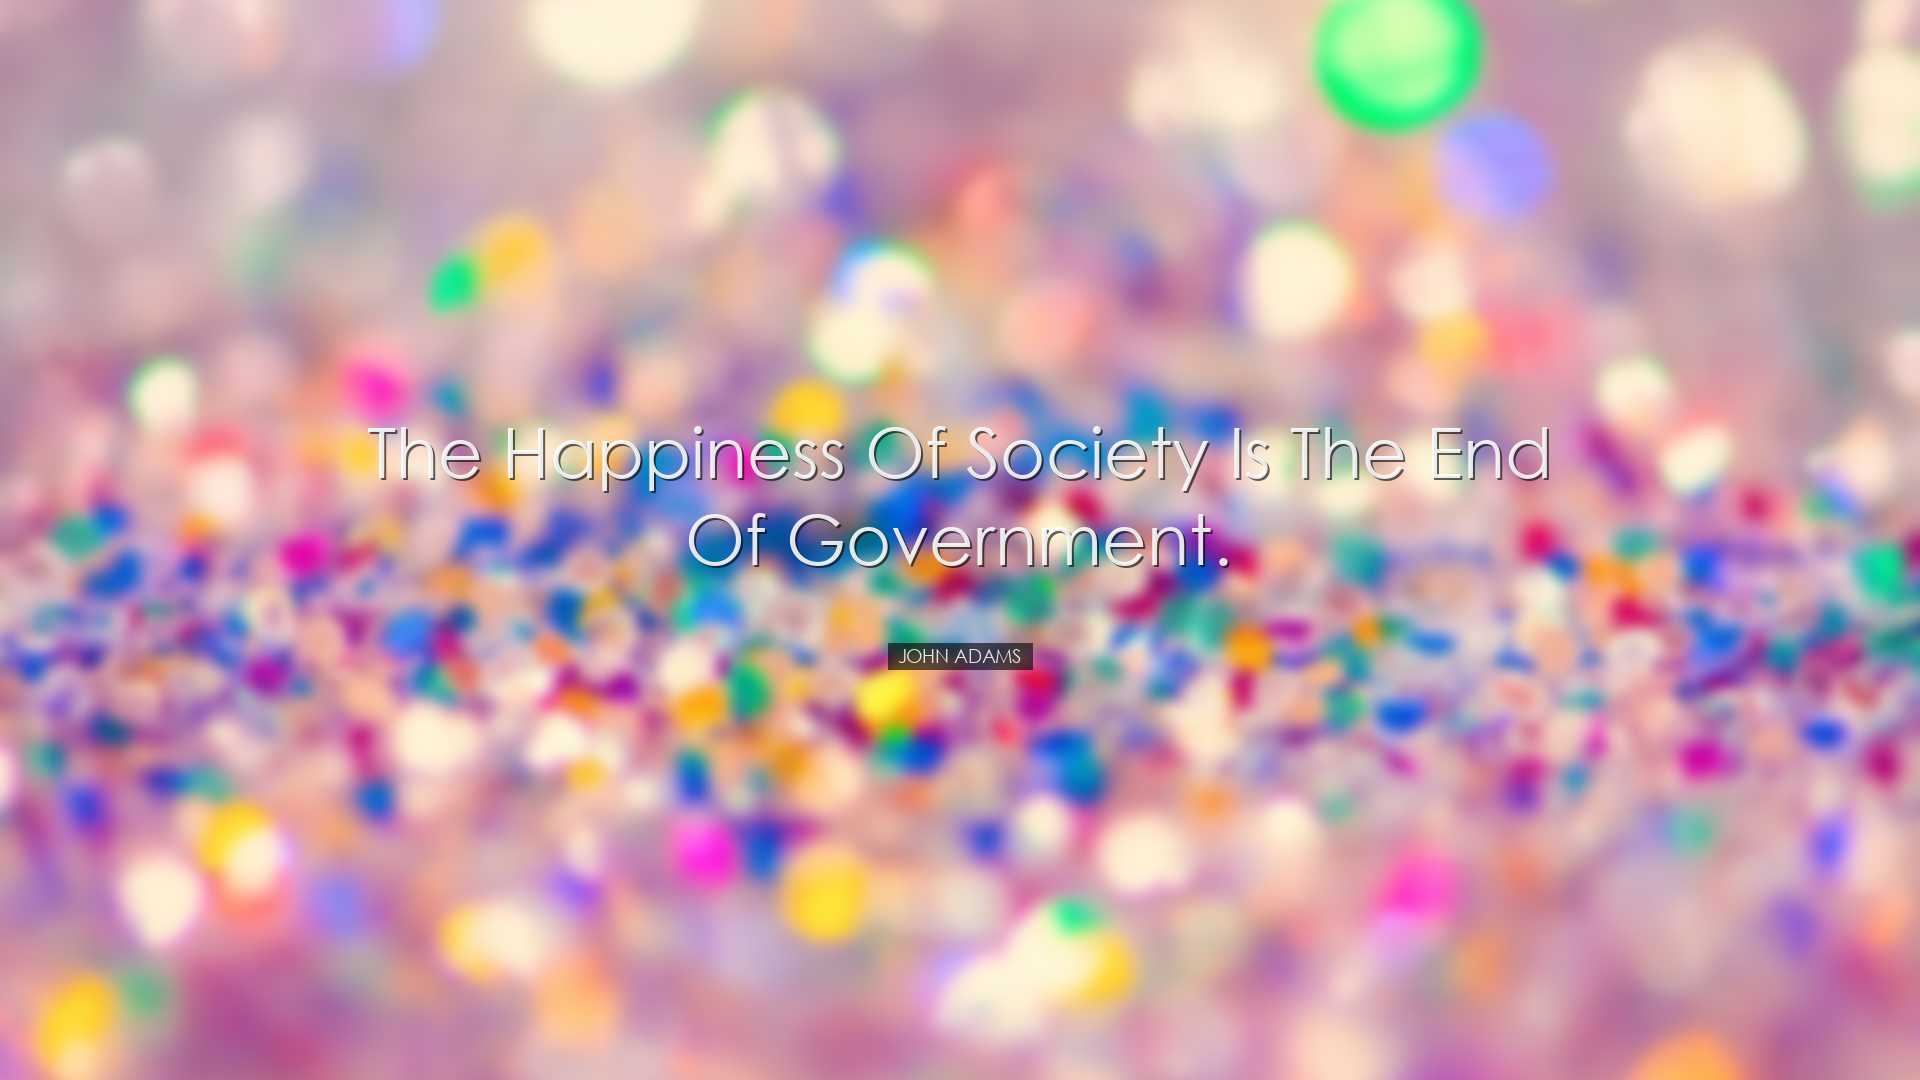 The happiness of society is the end of government. - John Adams